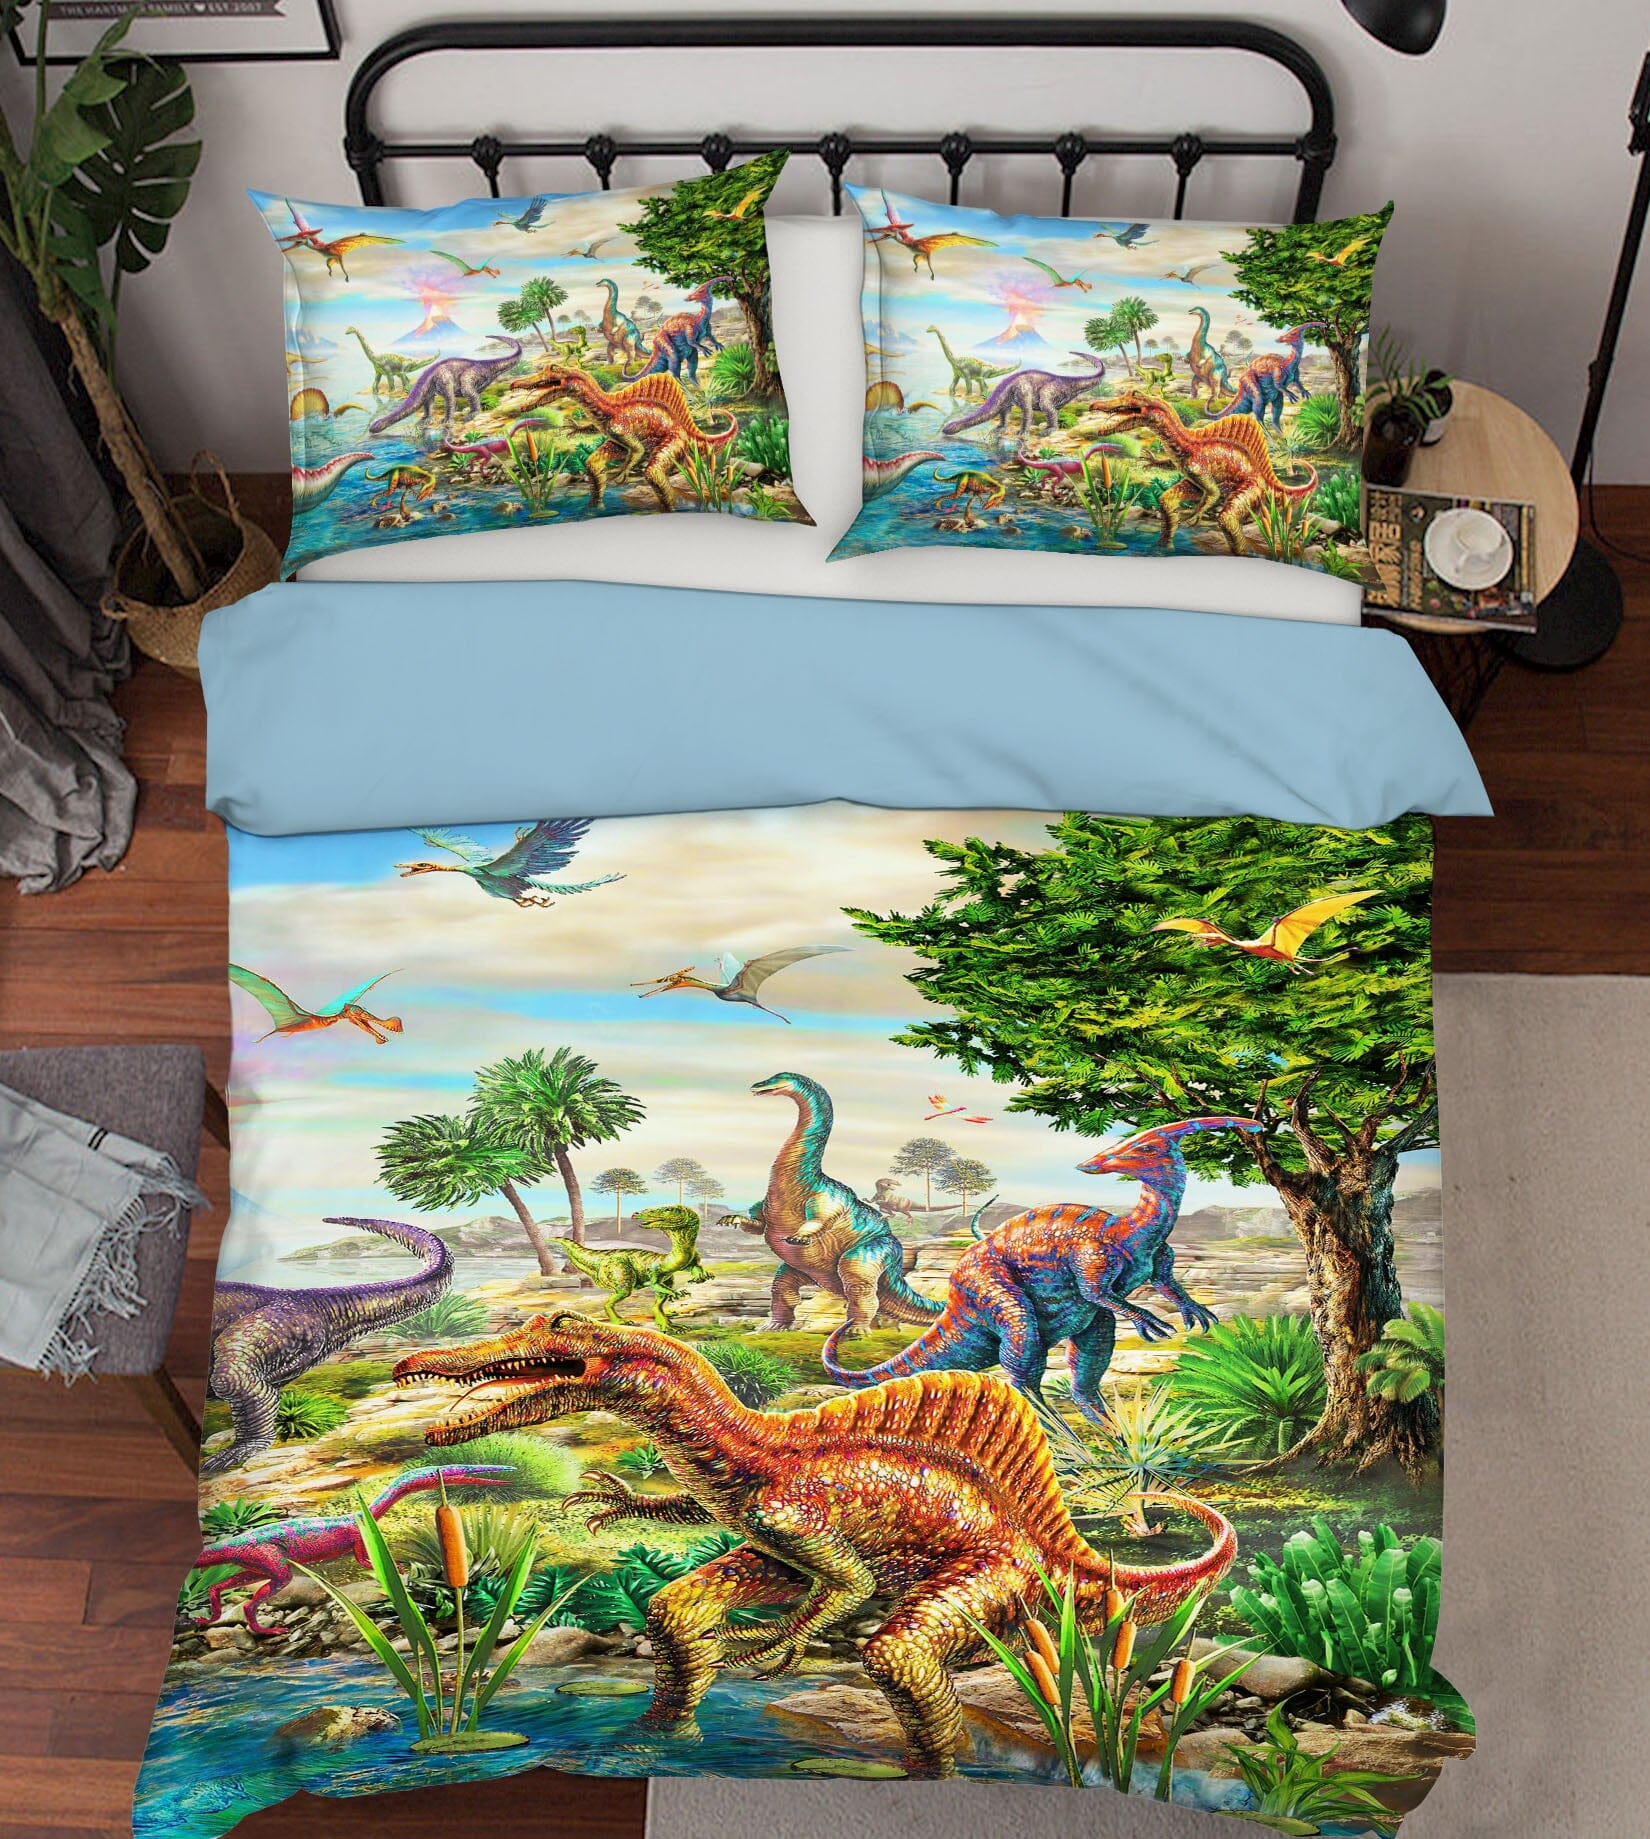 3D Dinosaur Forest 2124 Adrian Chesterman Bedding Bed Pillowcases Quilt Quiet Covers AJ Creativity Home 